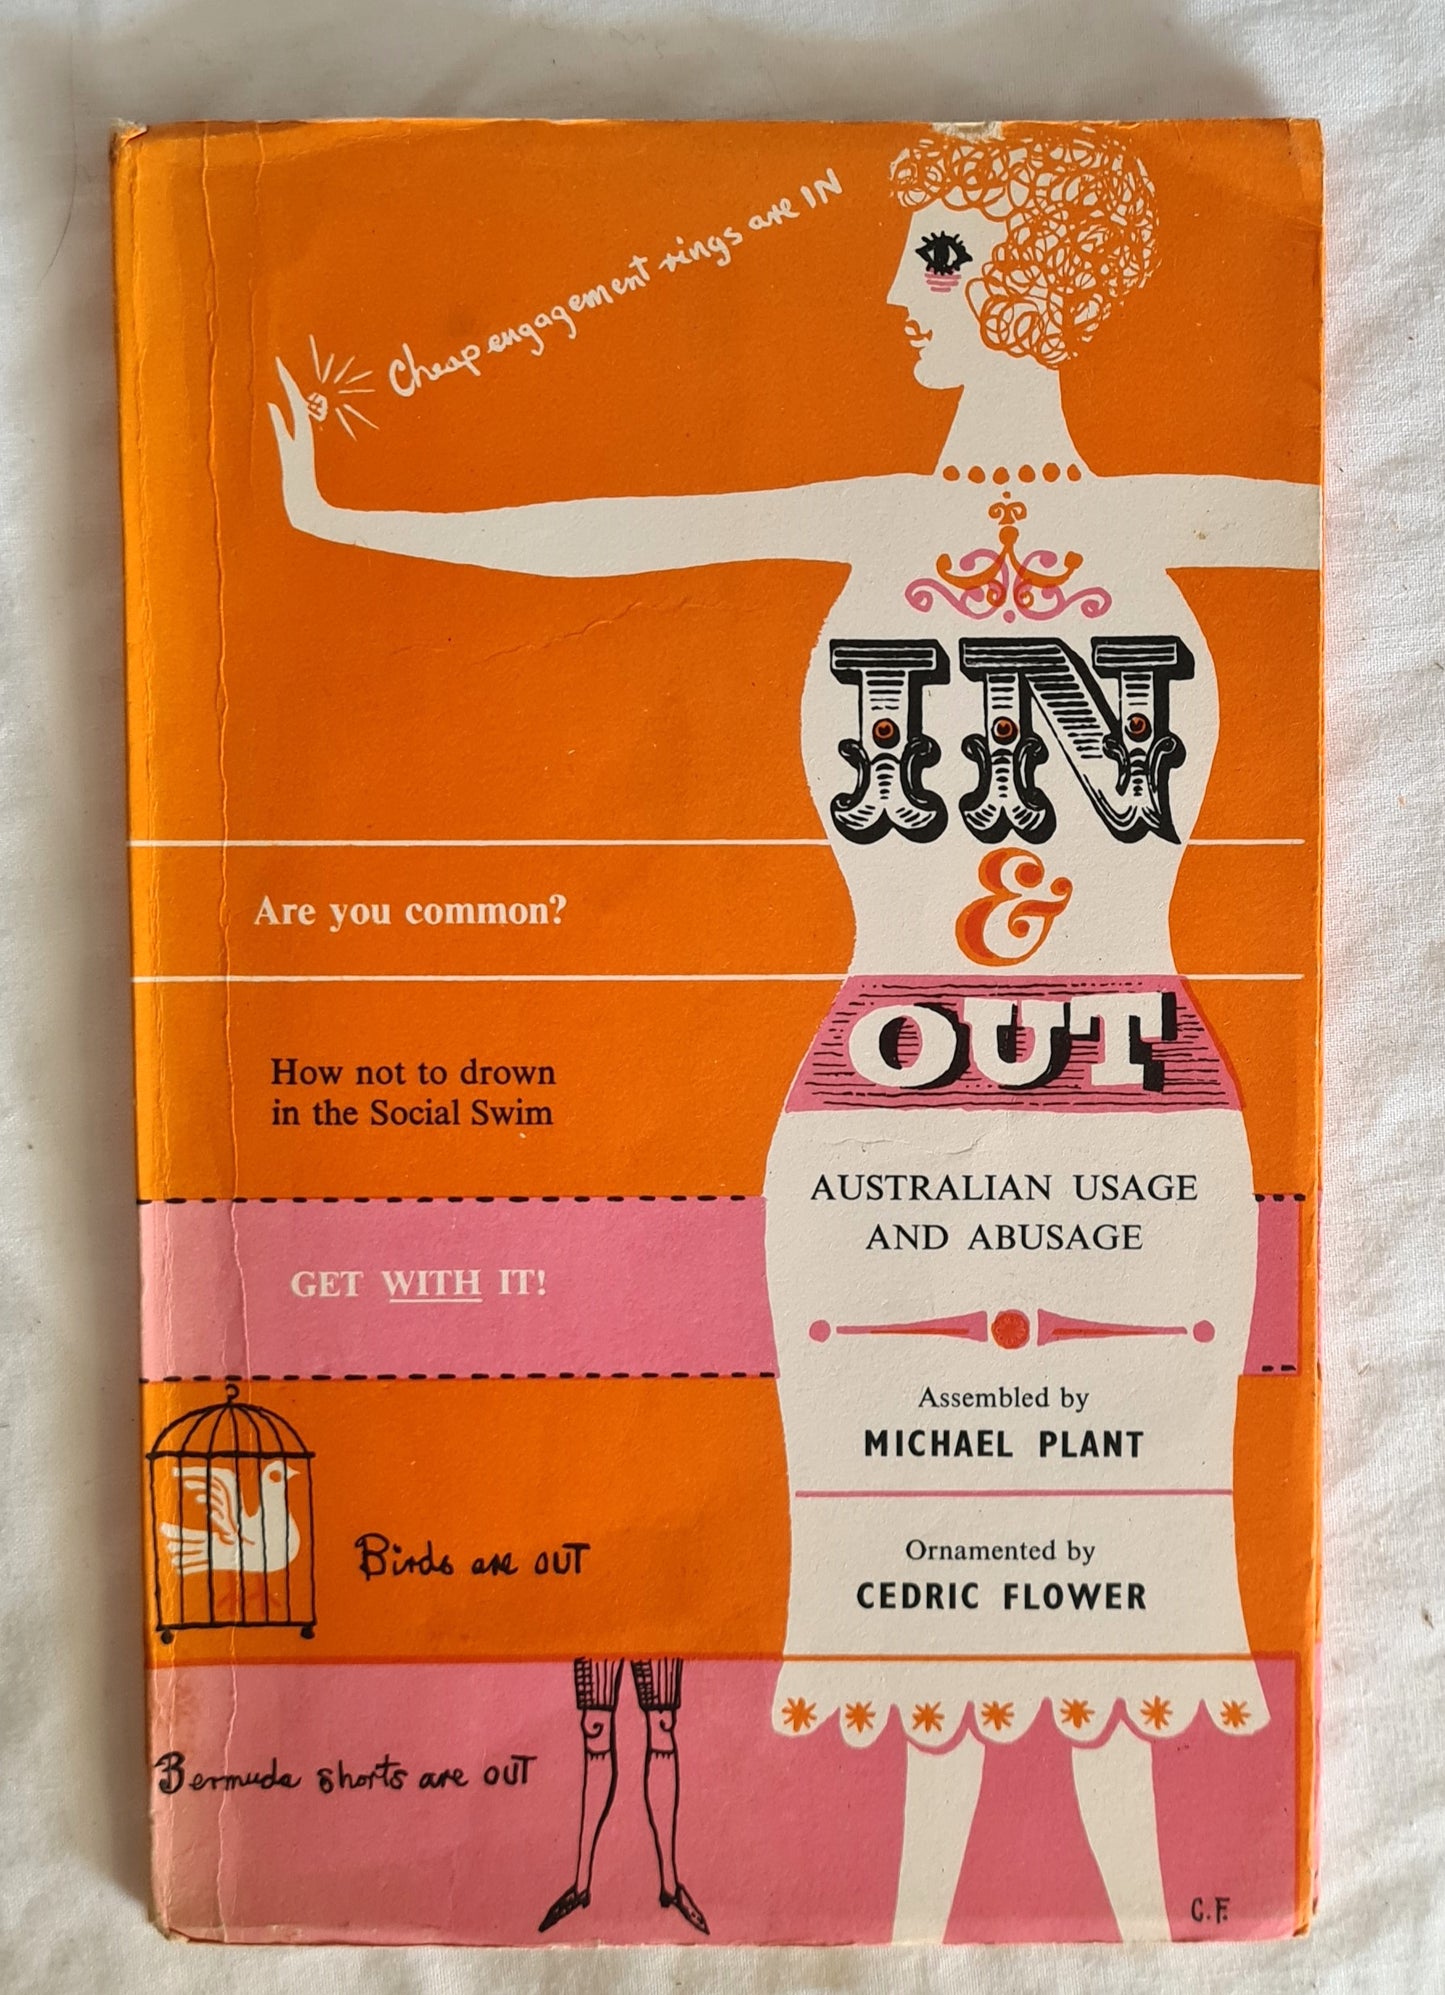 In & Out  Australian Usage and Abusage  Assembled by Michael Plant  Ornamented by Cedric Flower